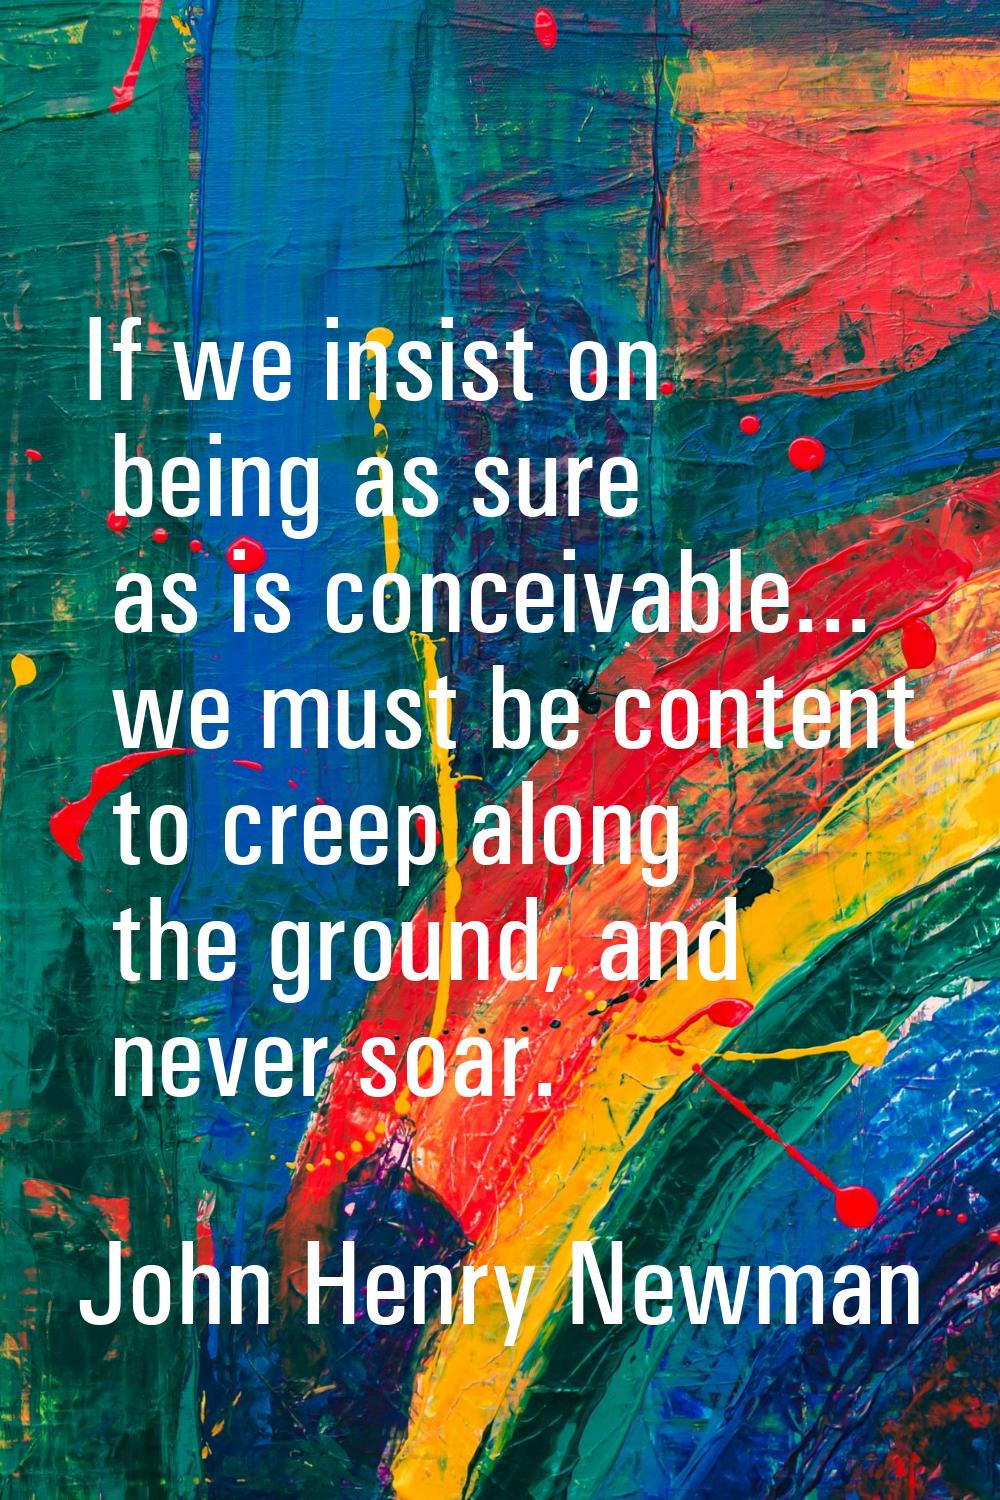 If we insist on being as sure as is conceivable... we must be content to creep along the ground, an